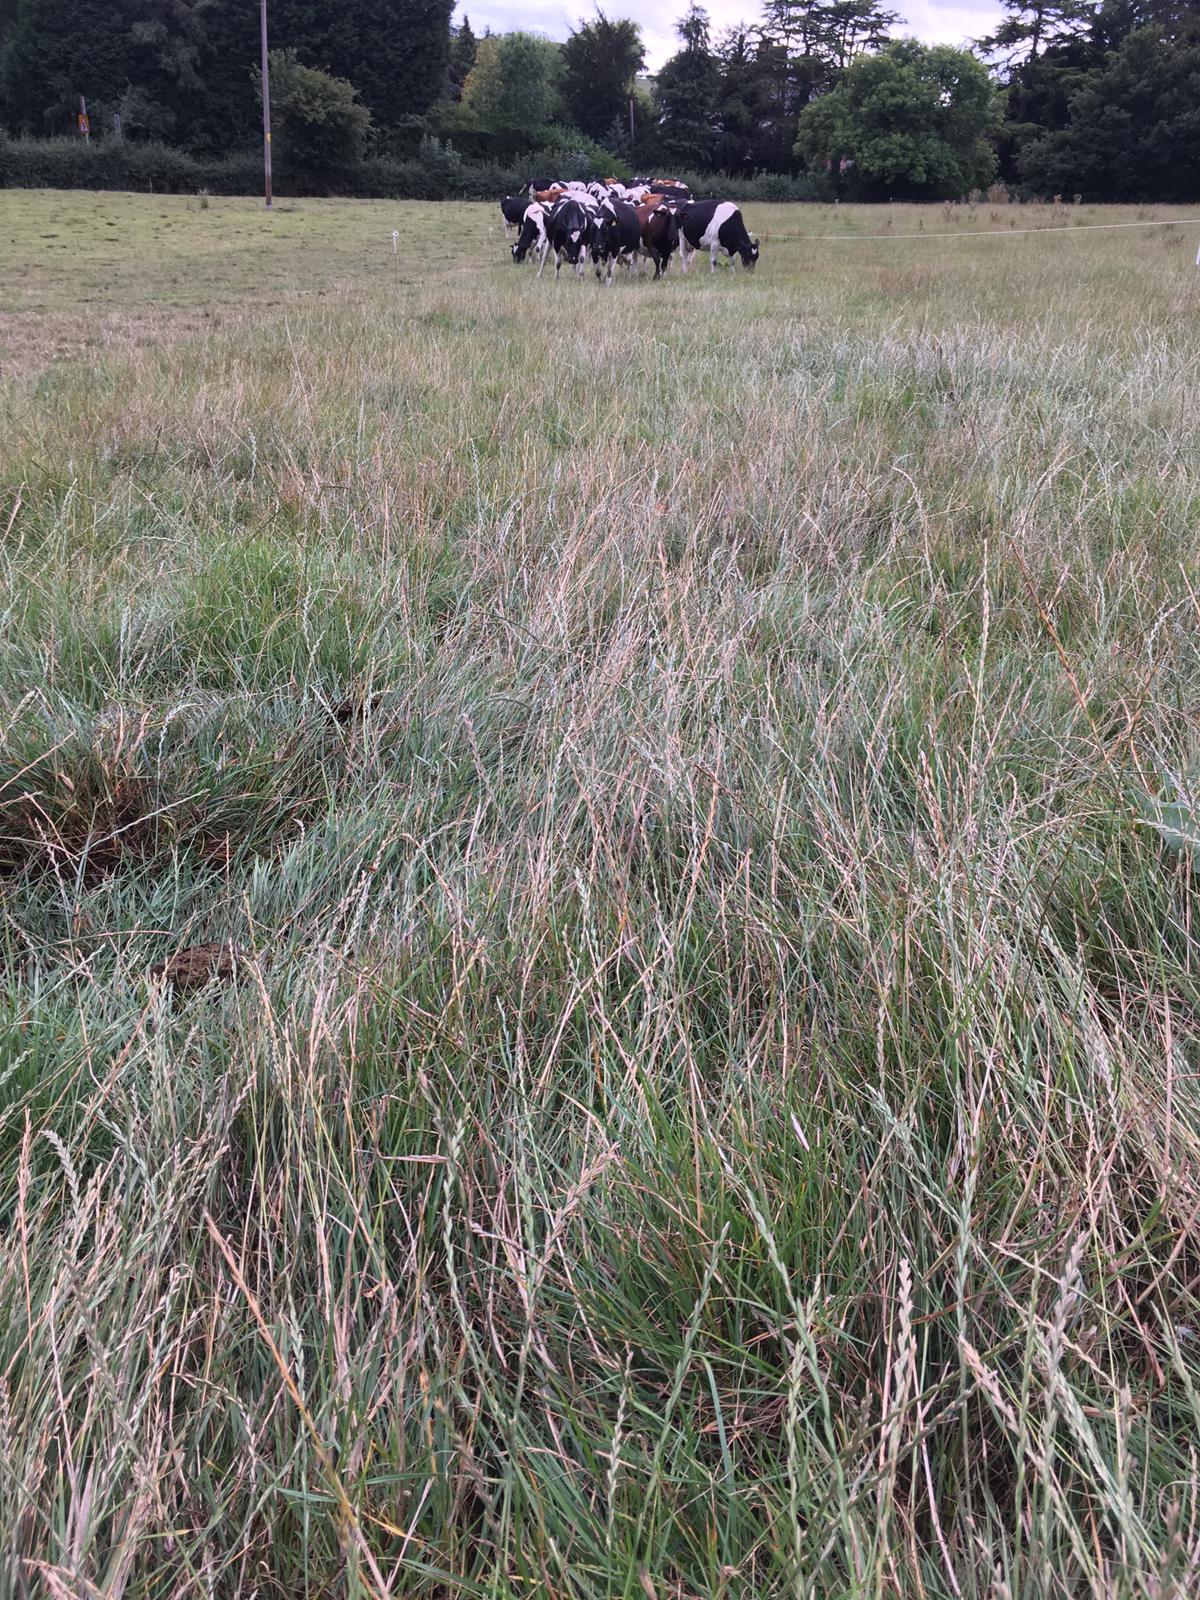 a group of cows grazing in a field